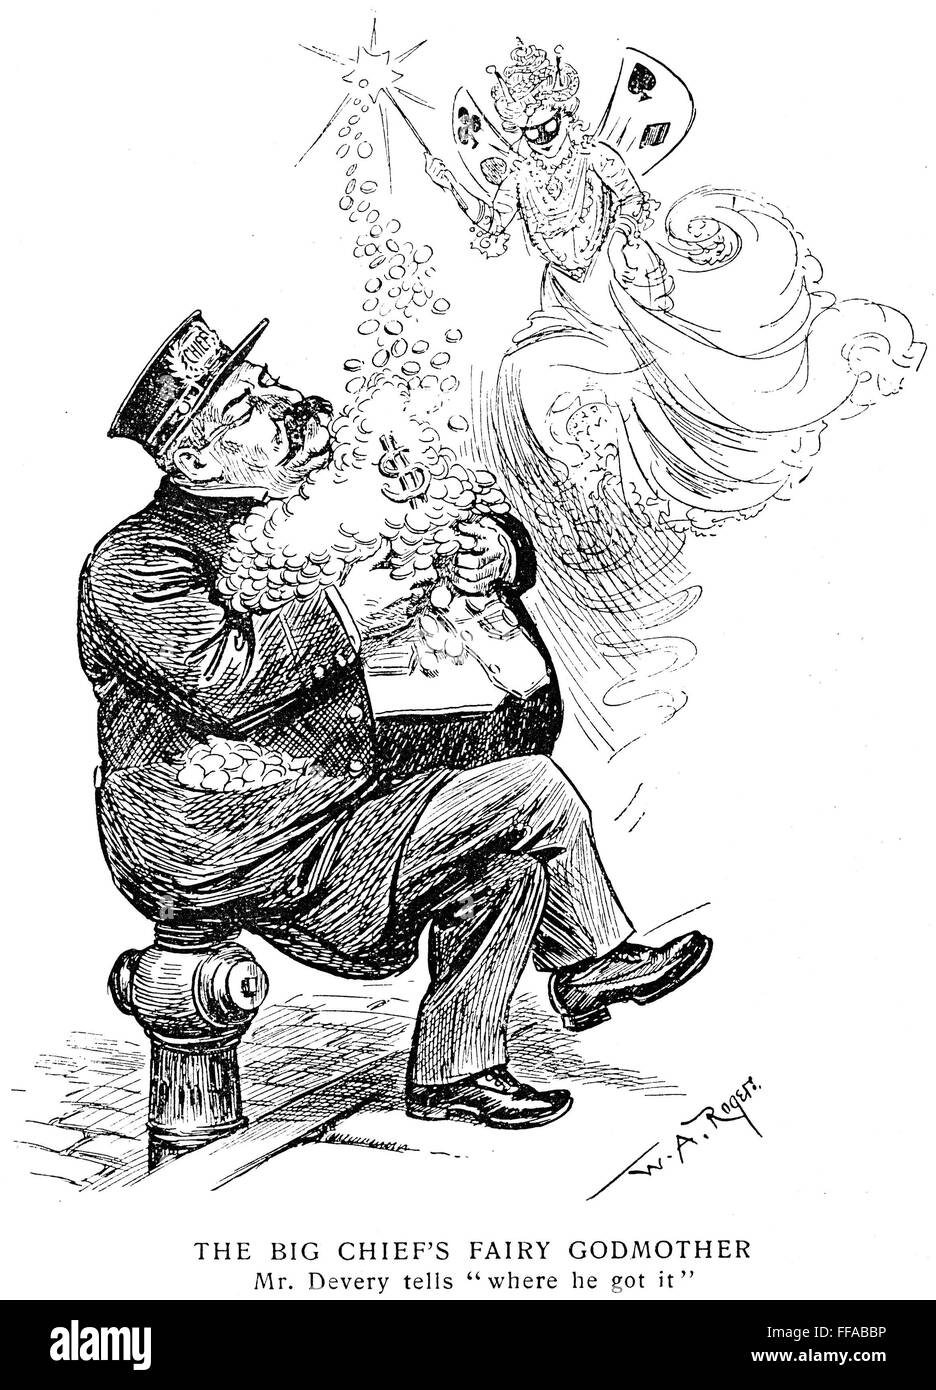 WILLIAM S. DEVERY CARTOON. /n'The Big Chief's Fairy Godmother: Mr. Devery tells 'where he got it.'' Cartoon, 1902, by William Allen Rogers lampooning the former New York city police chief for his ill-gotten gains from illegal gambling. Stock Photo